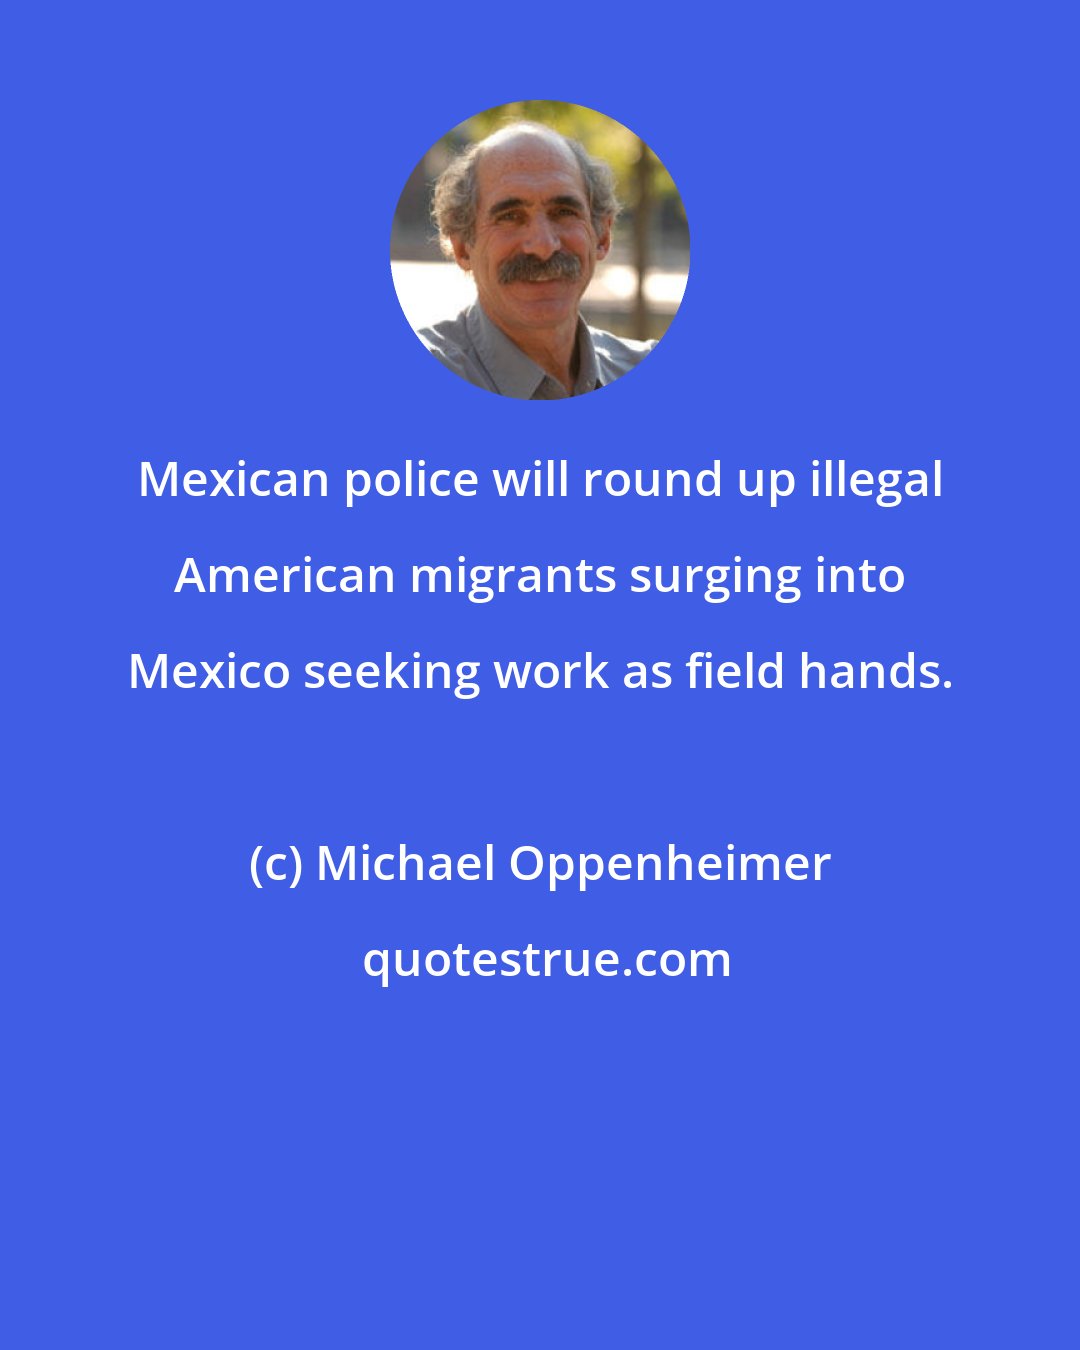 Michael Oppenheimer: Mexican police will round up illegal American migrants surging into Mexico seeking work as field hands.